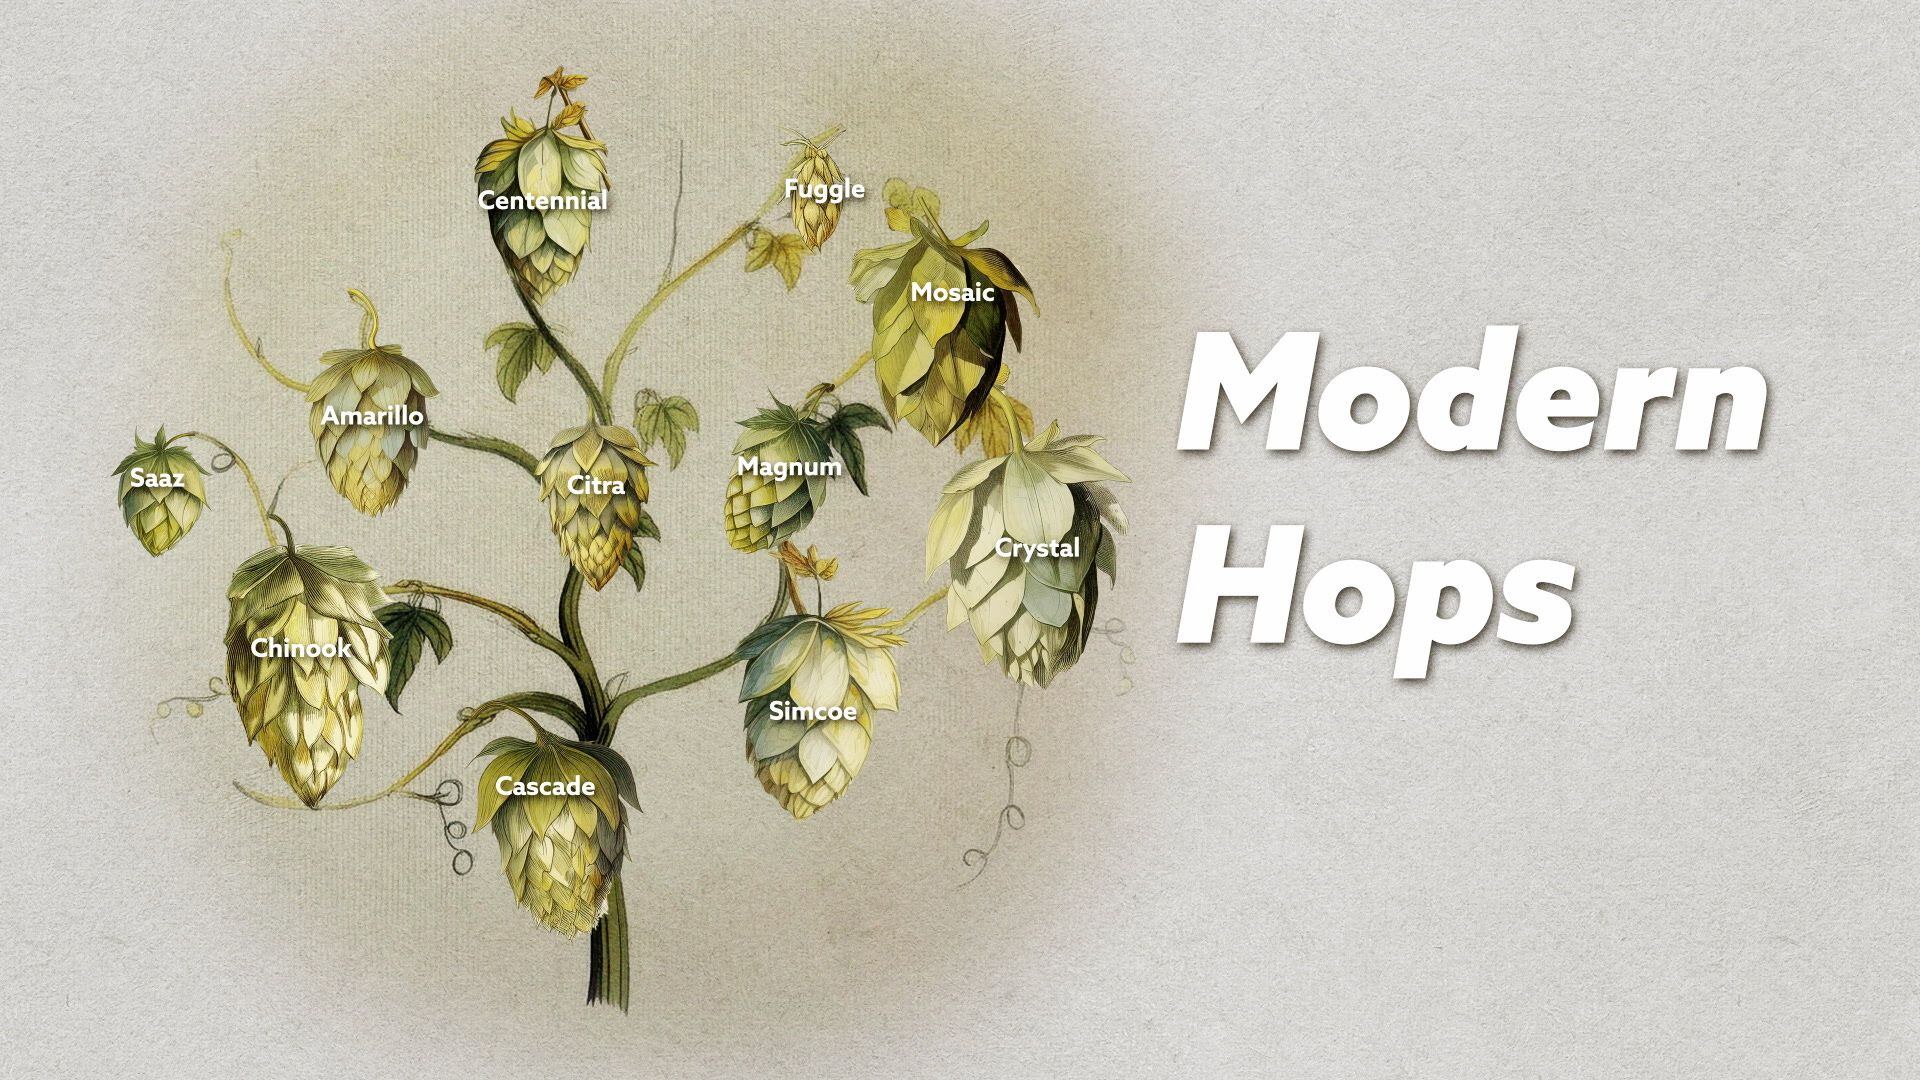 These are some of the most popular hops used in modern IPAs.